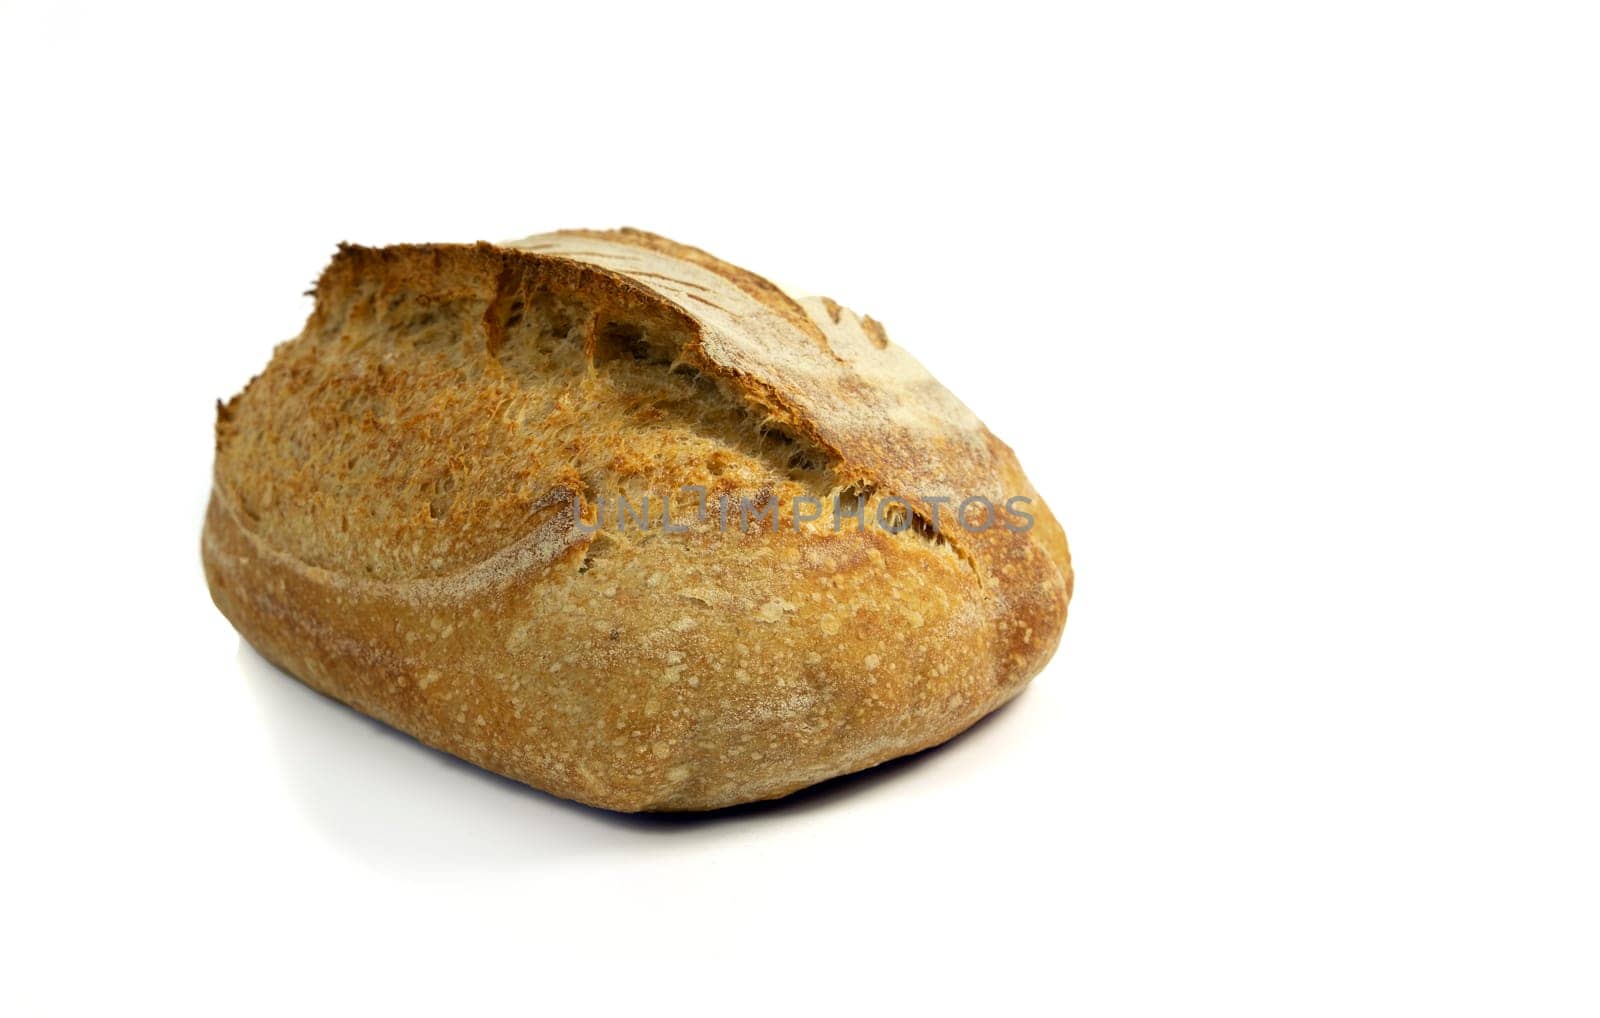 A fresh loaf of crusty sourdough bread isolated on white background